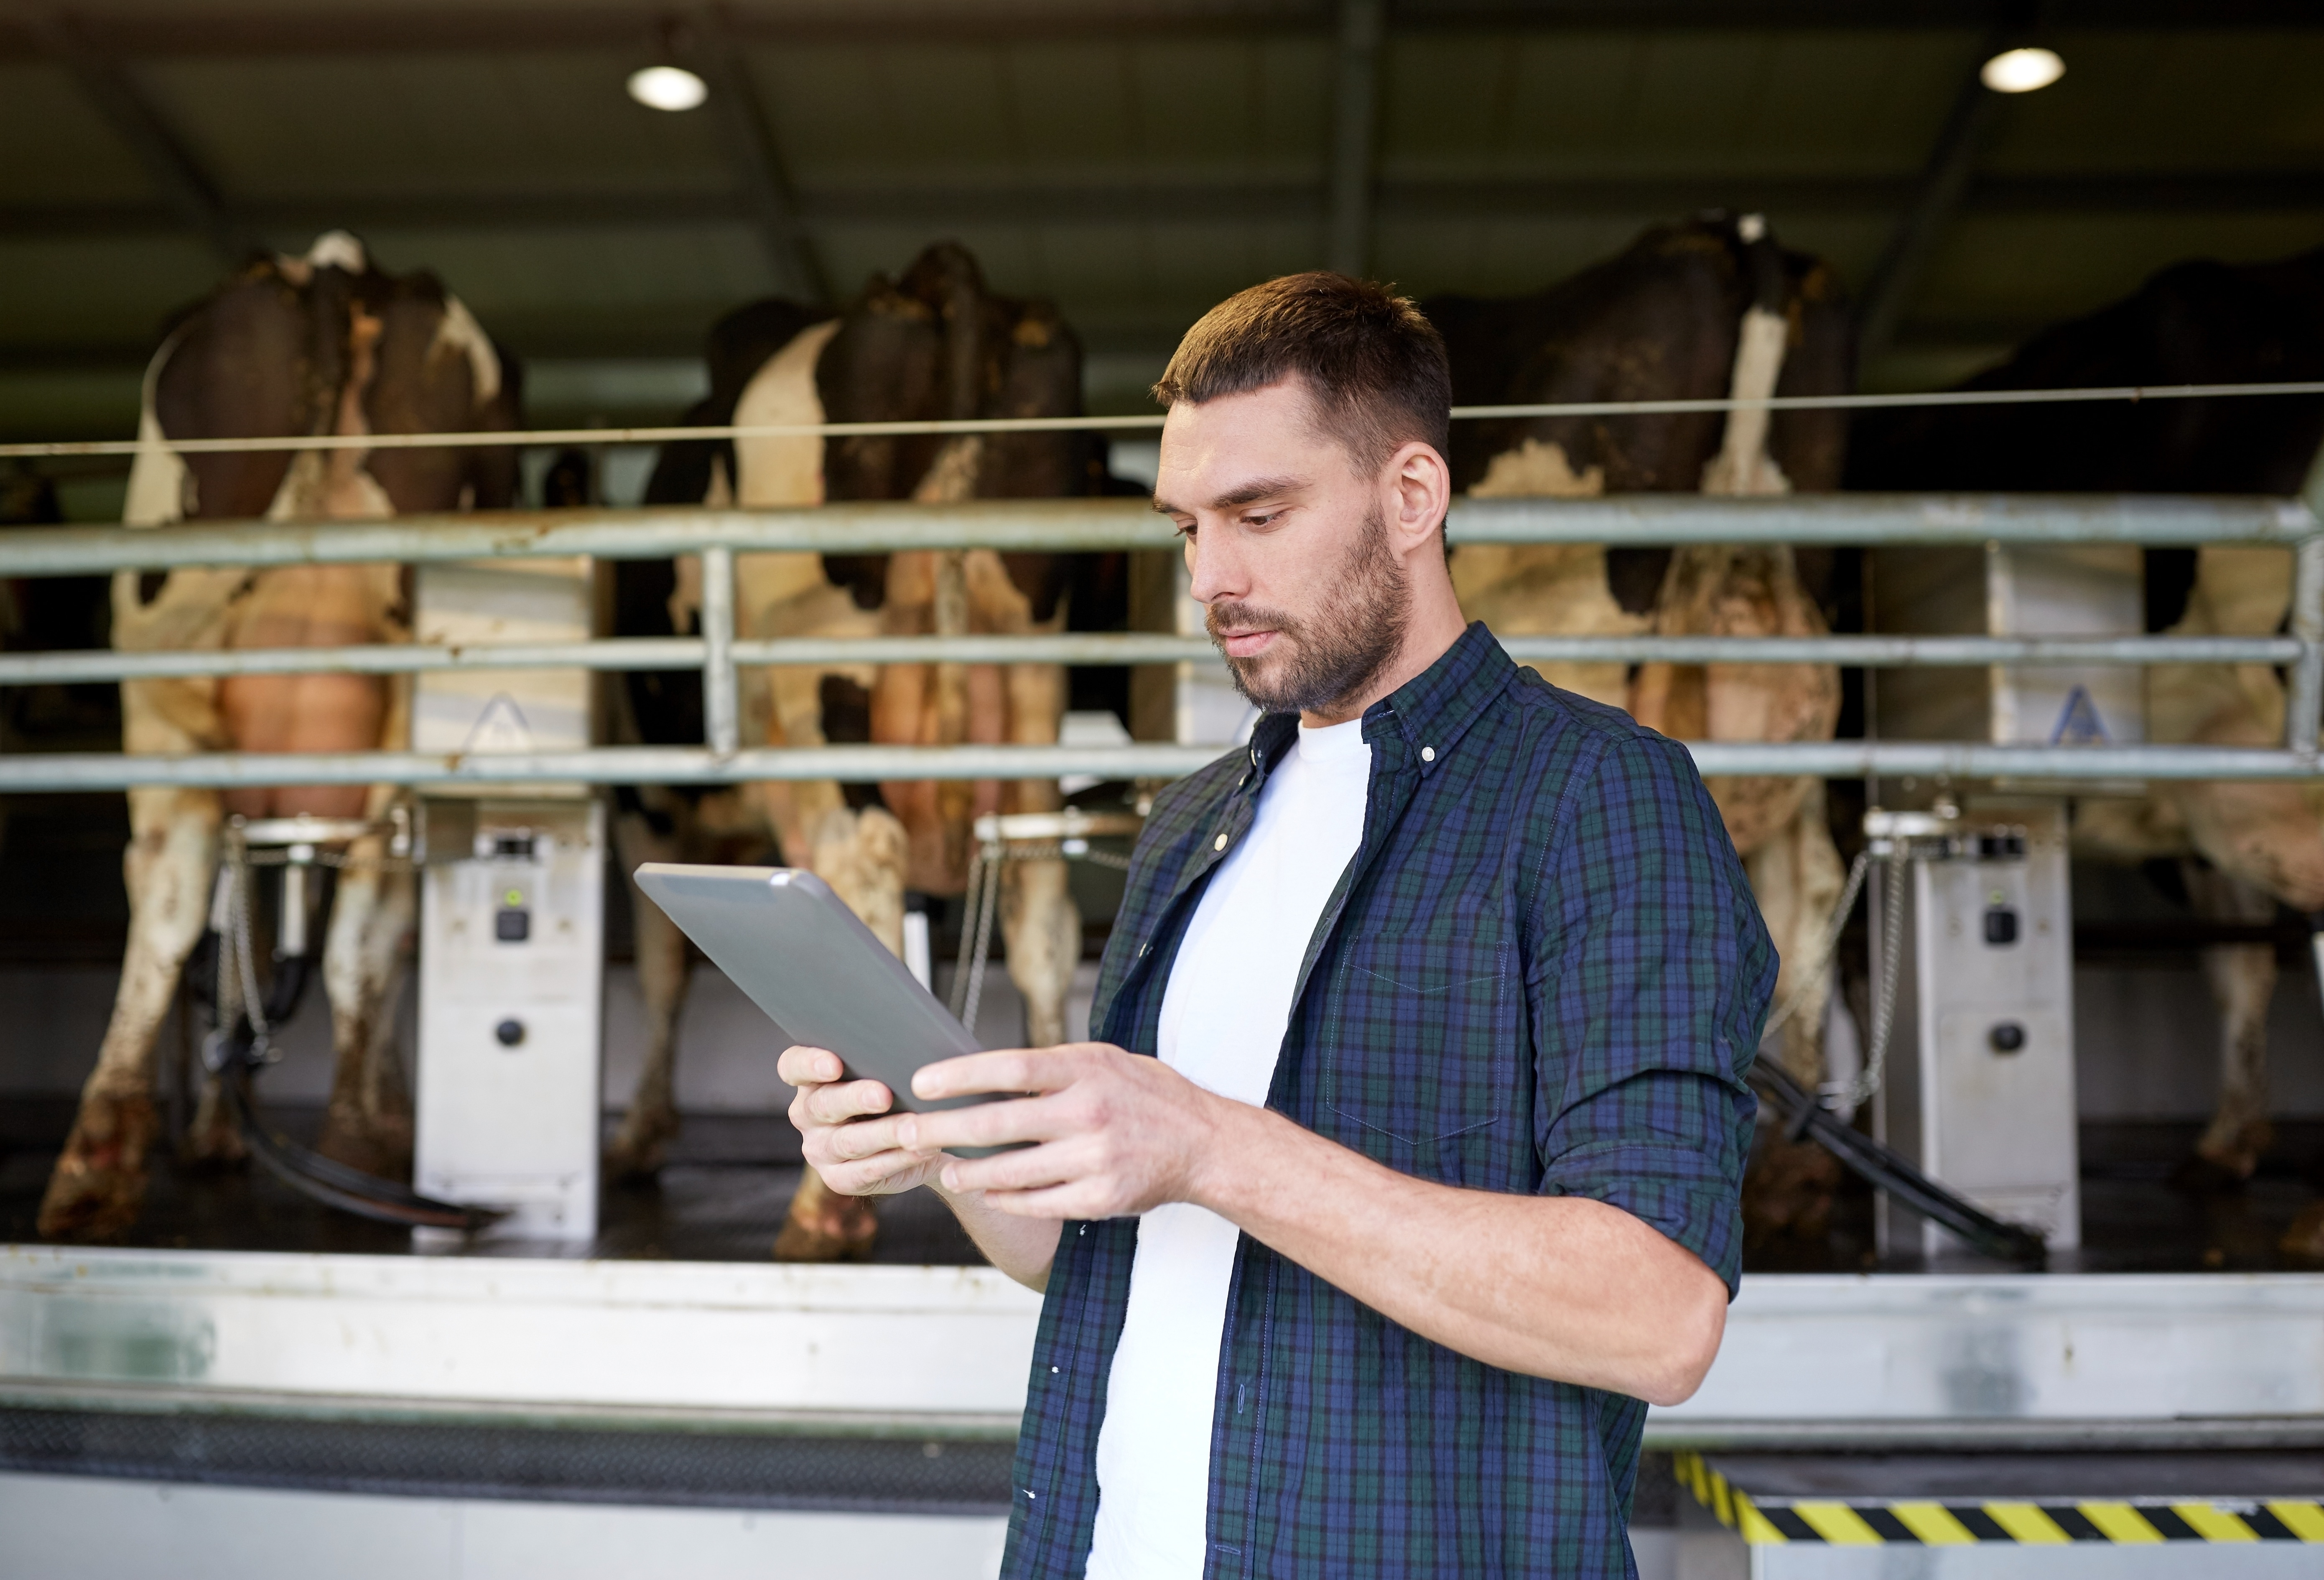 Young Man With Tablet Pc And Cows On Dairy Farm